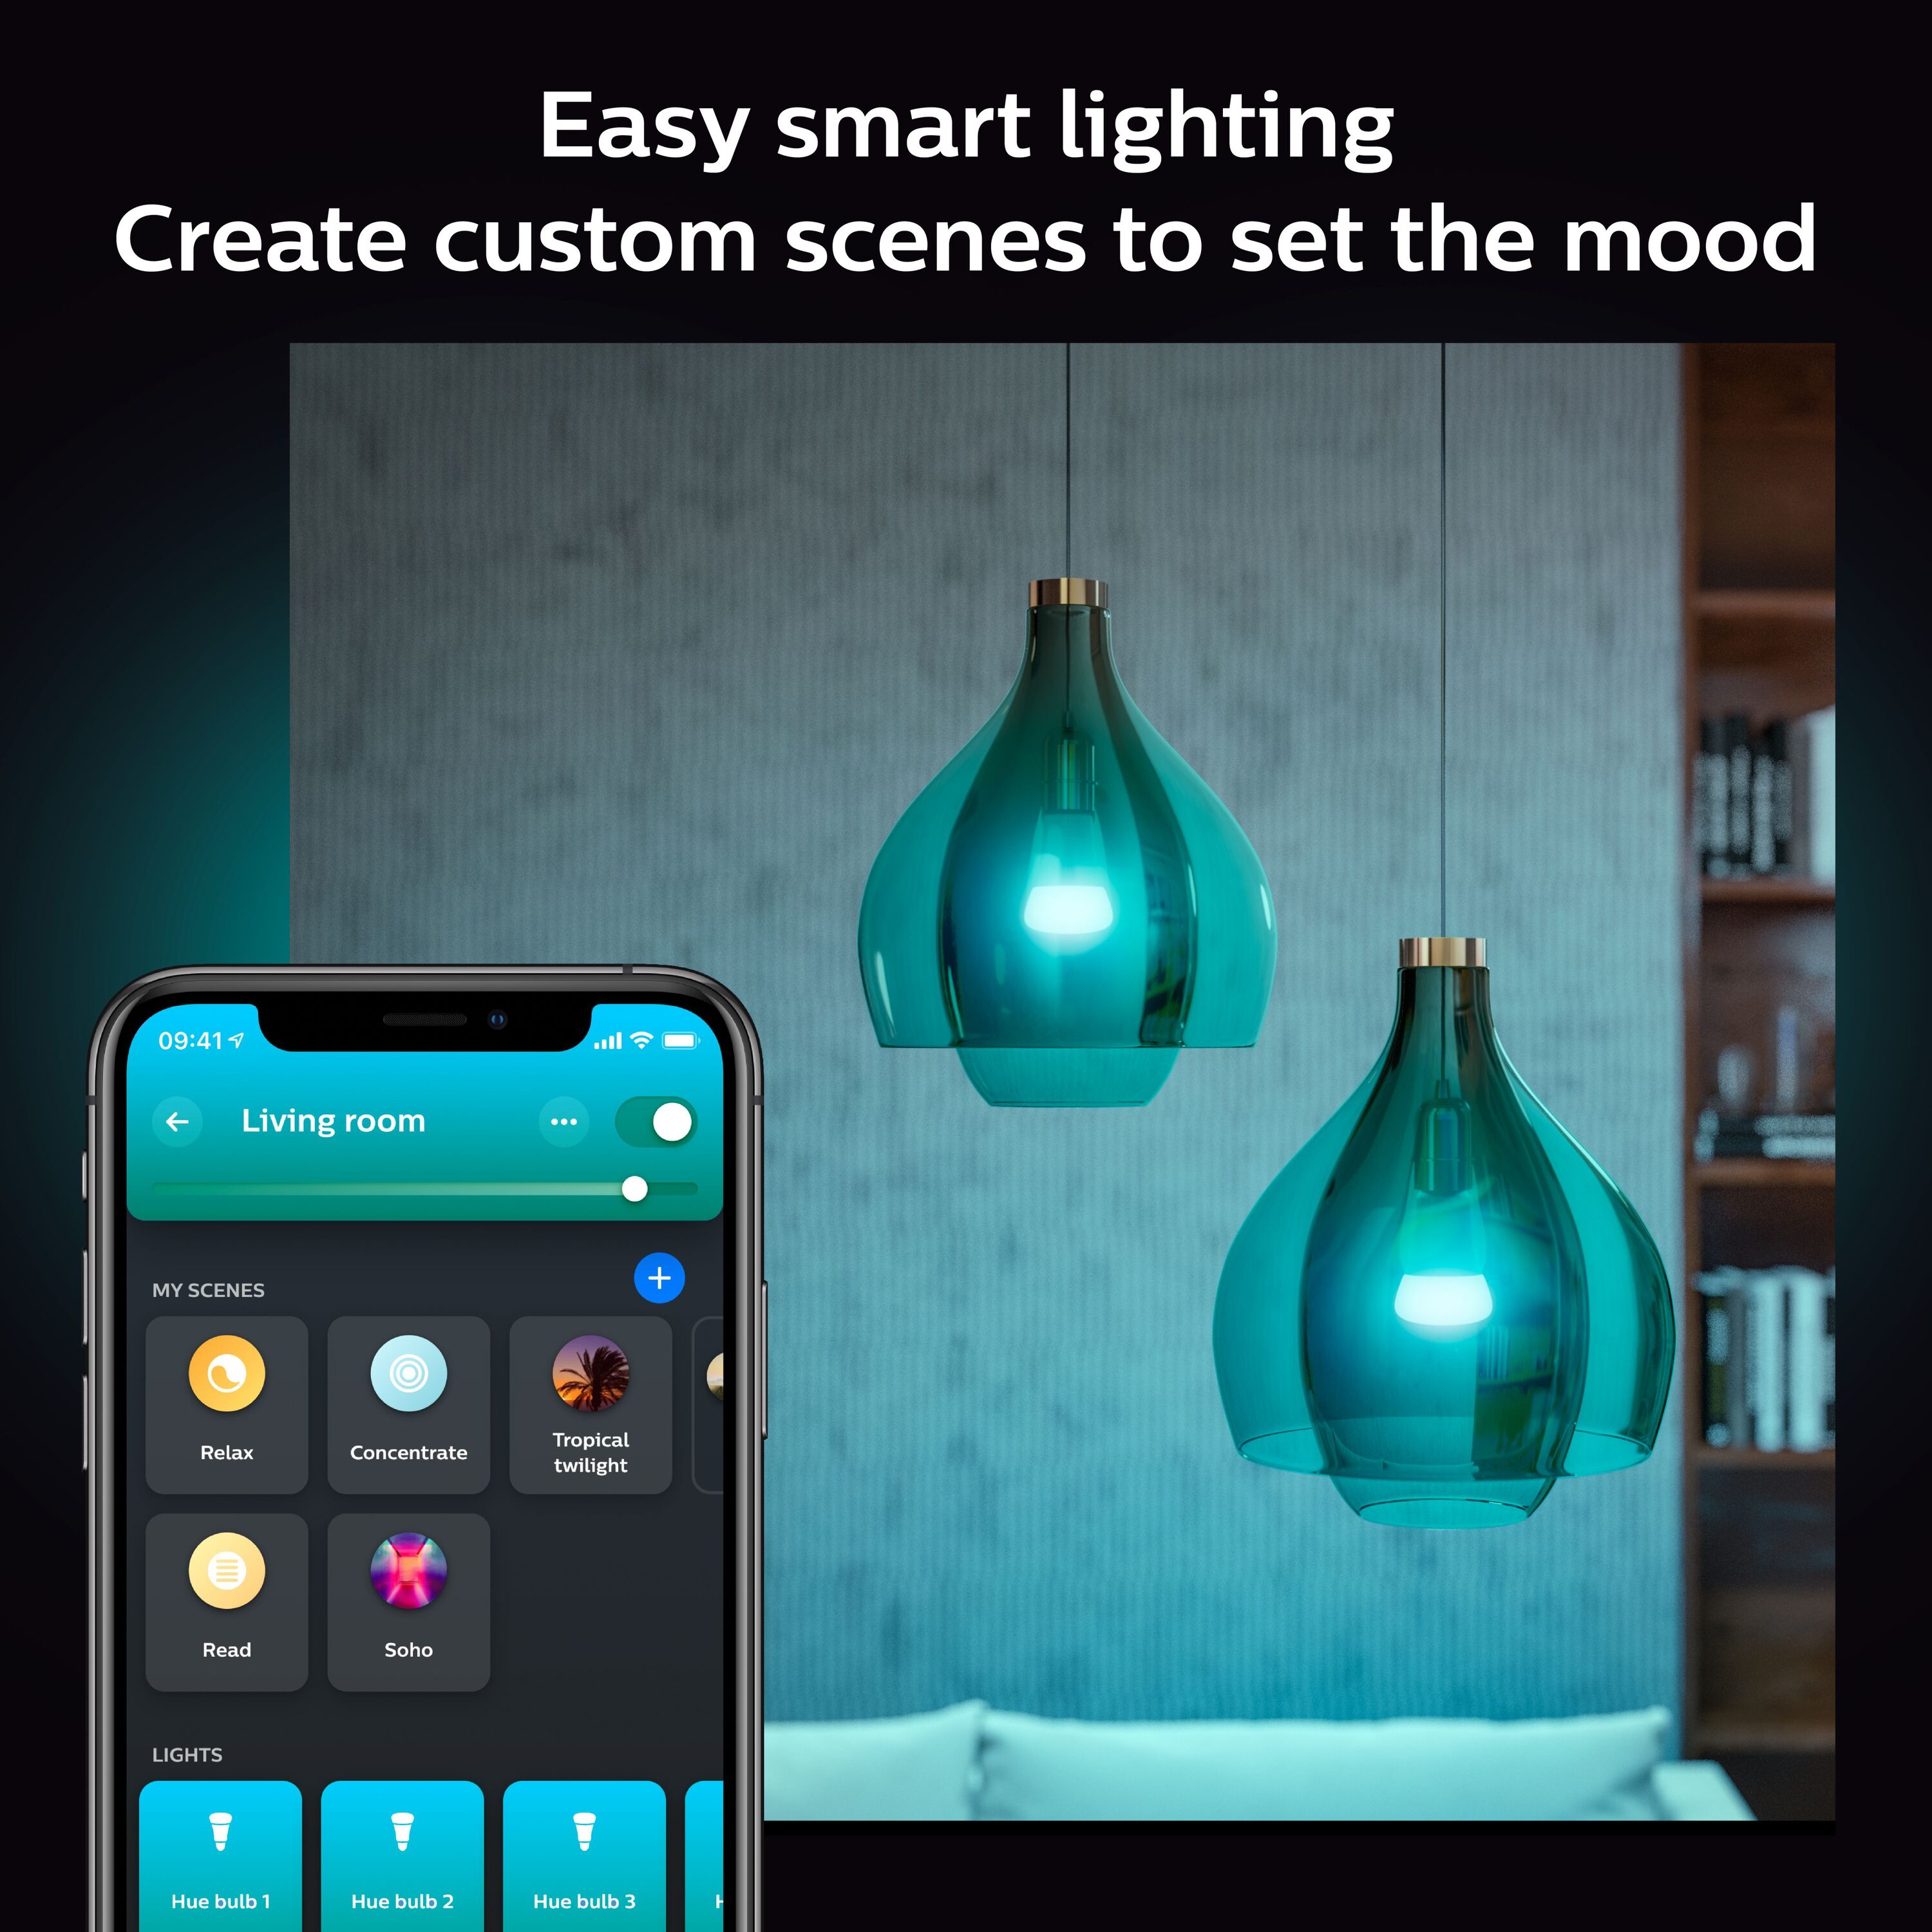 Buy Philips HUE New White Ambiance Smart Light Bulb 100W - 1600 Lumen [E27  Edison Screw] With Bluetooth Works With Alexa, Google Assistant And Apple  Homekit Online - Shop Home & Garden